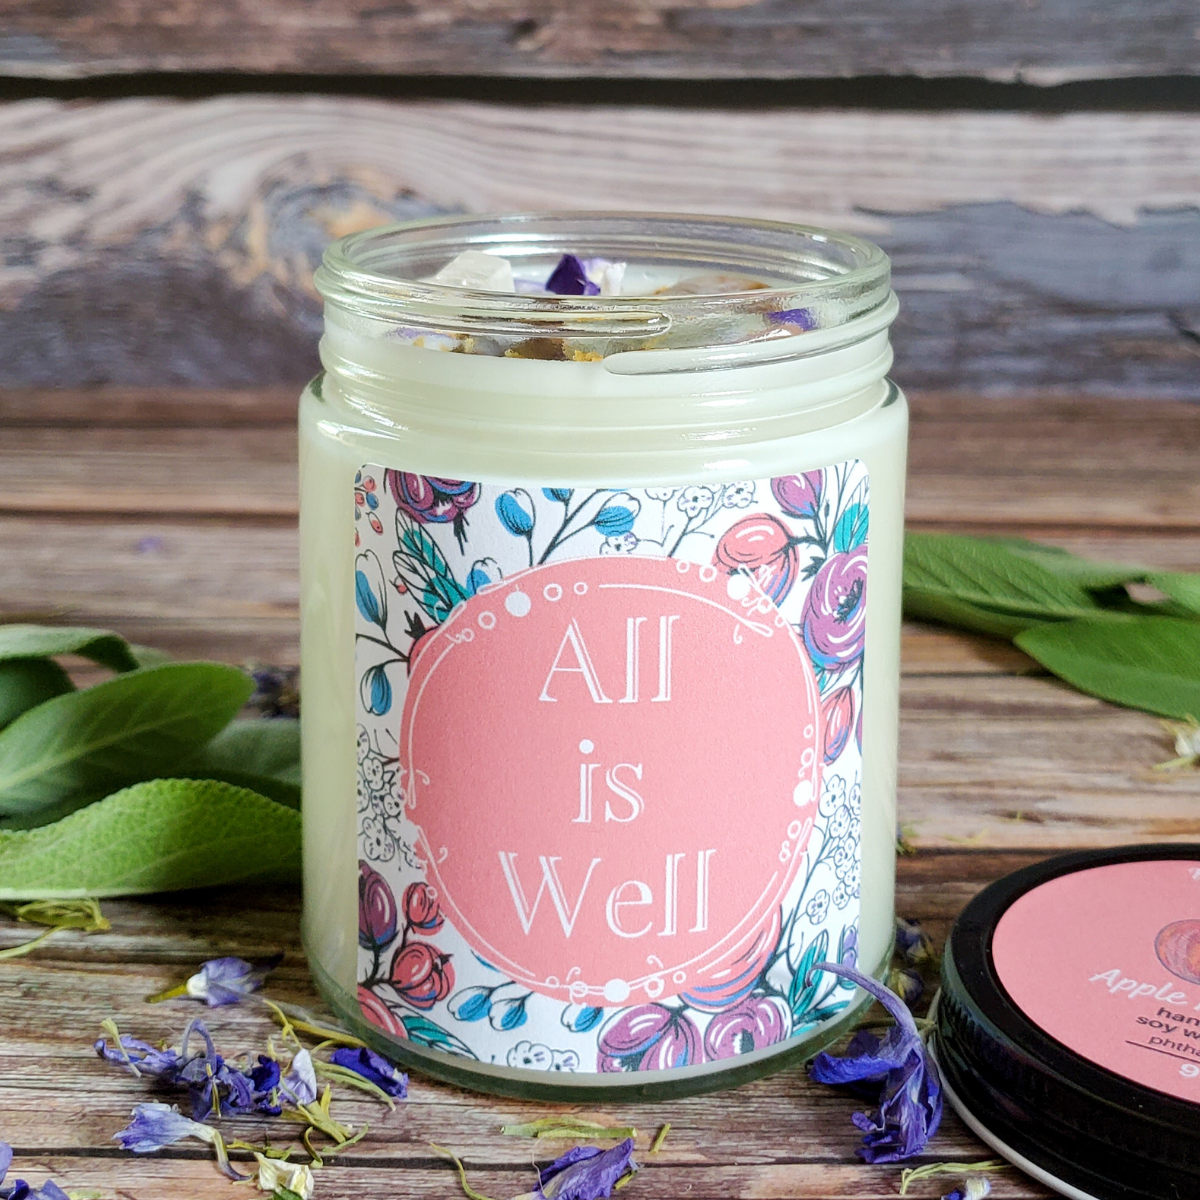 Wellness intention candle, Apple Pecan sage